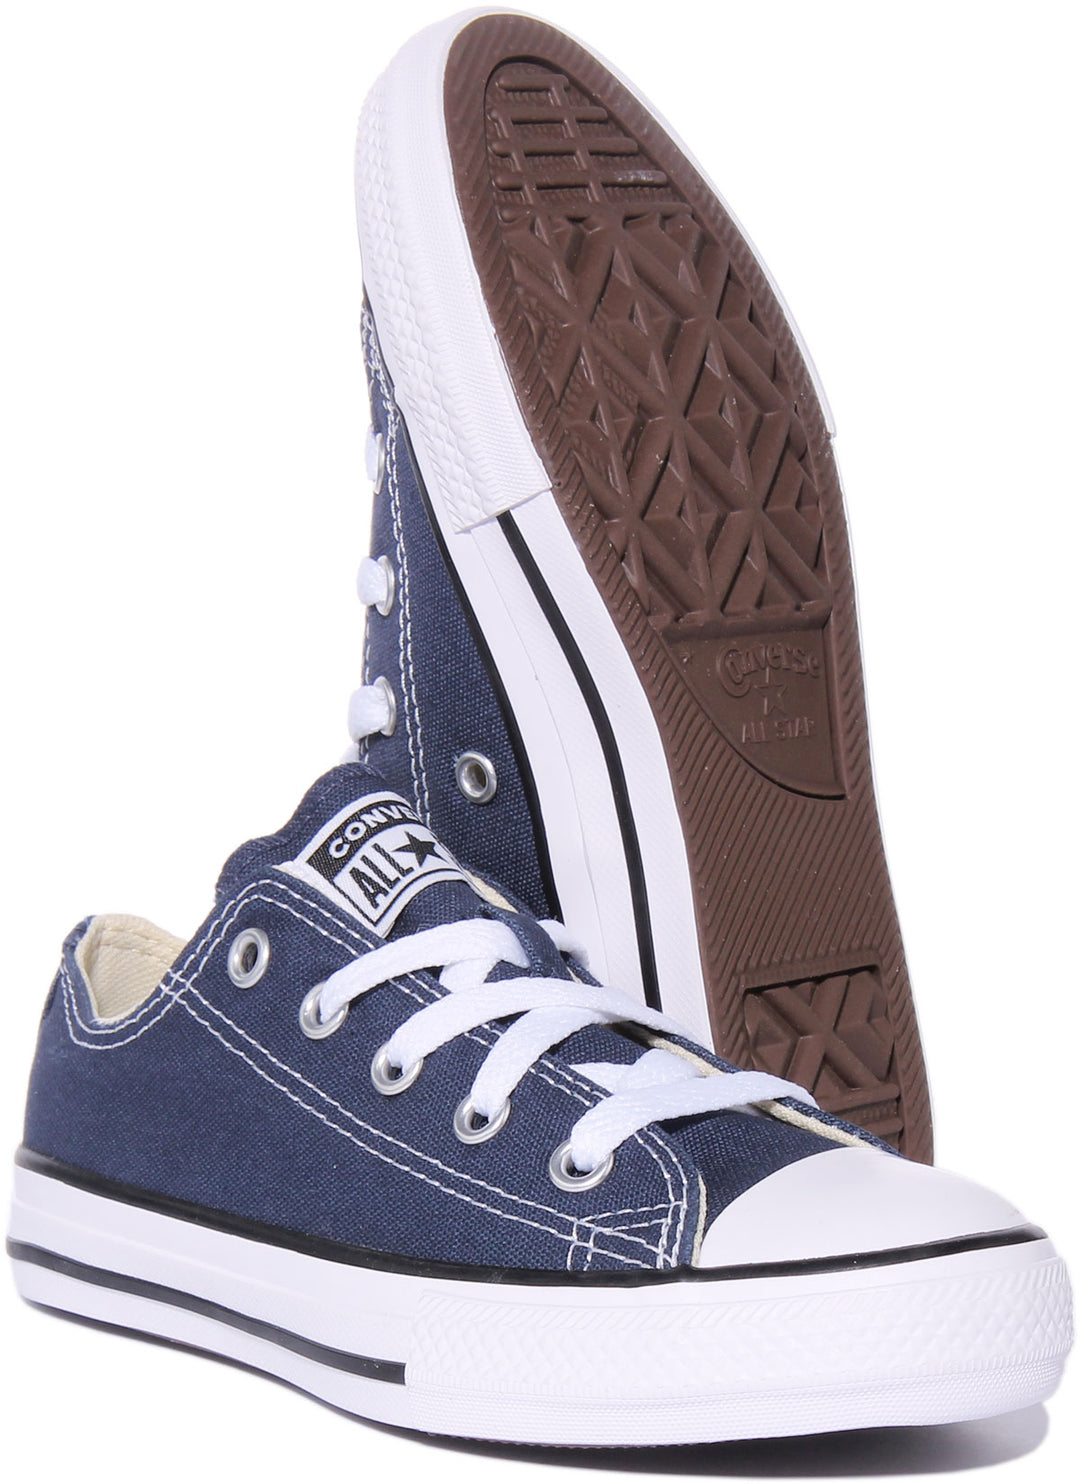 Converse All Star Low Core Kid In Navy